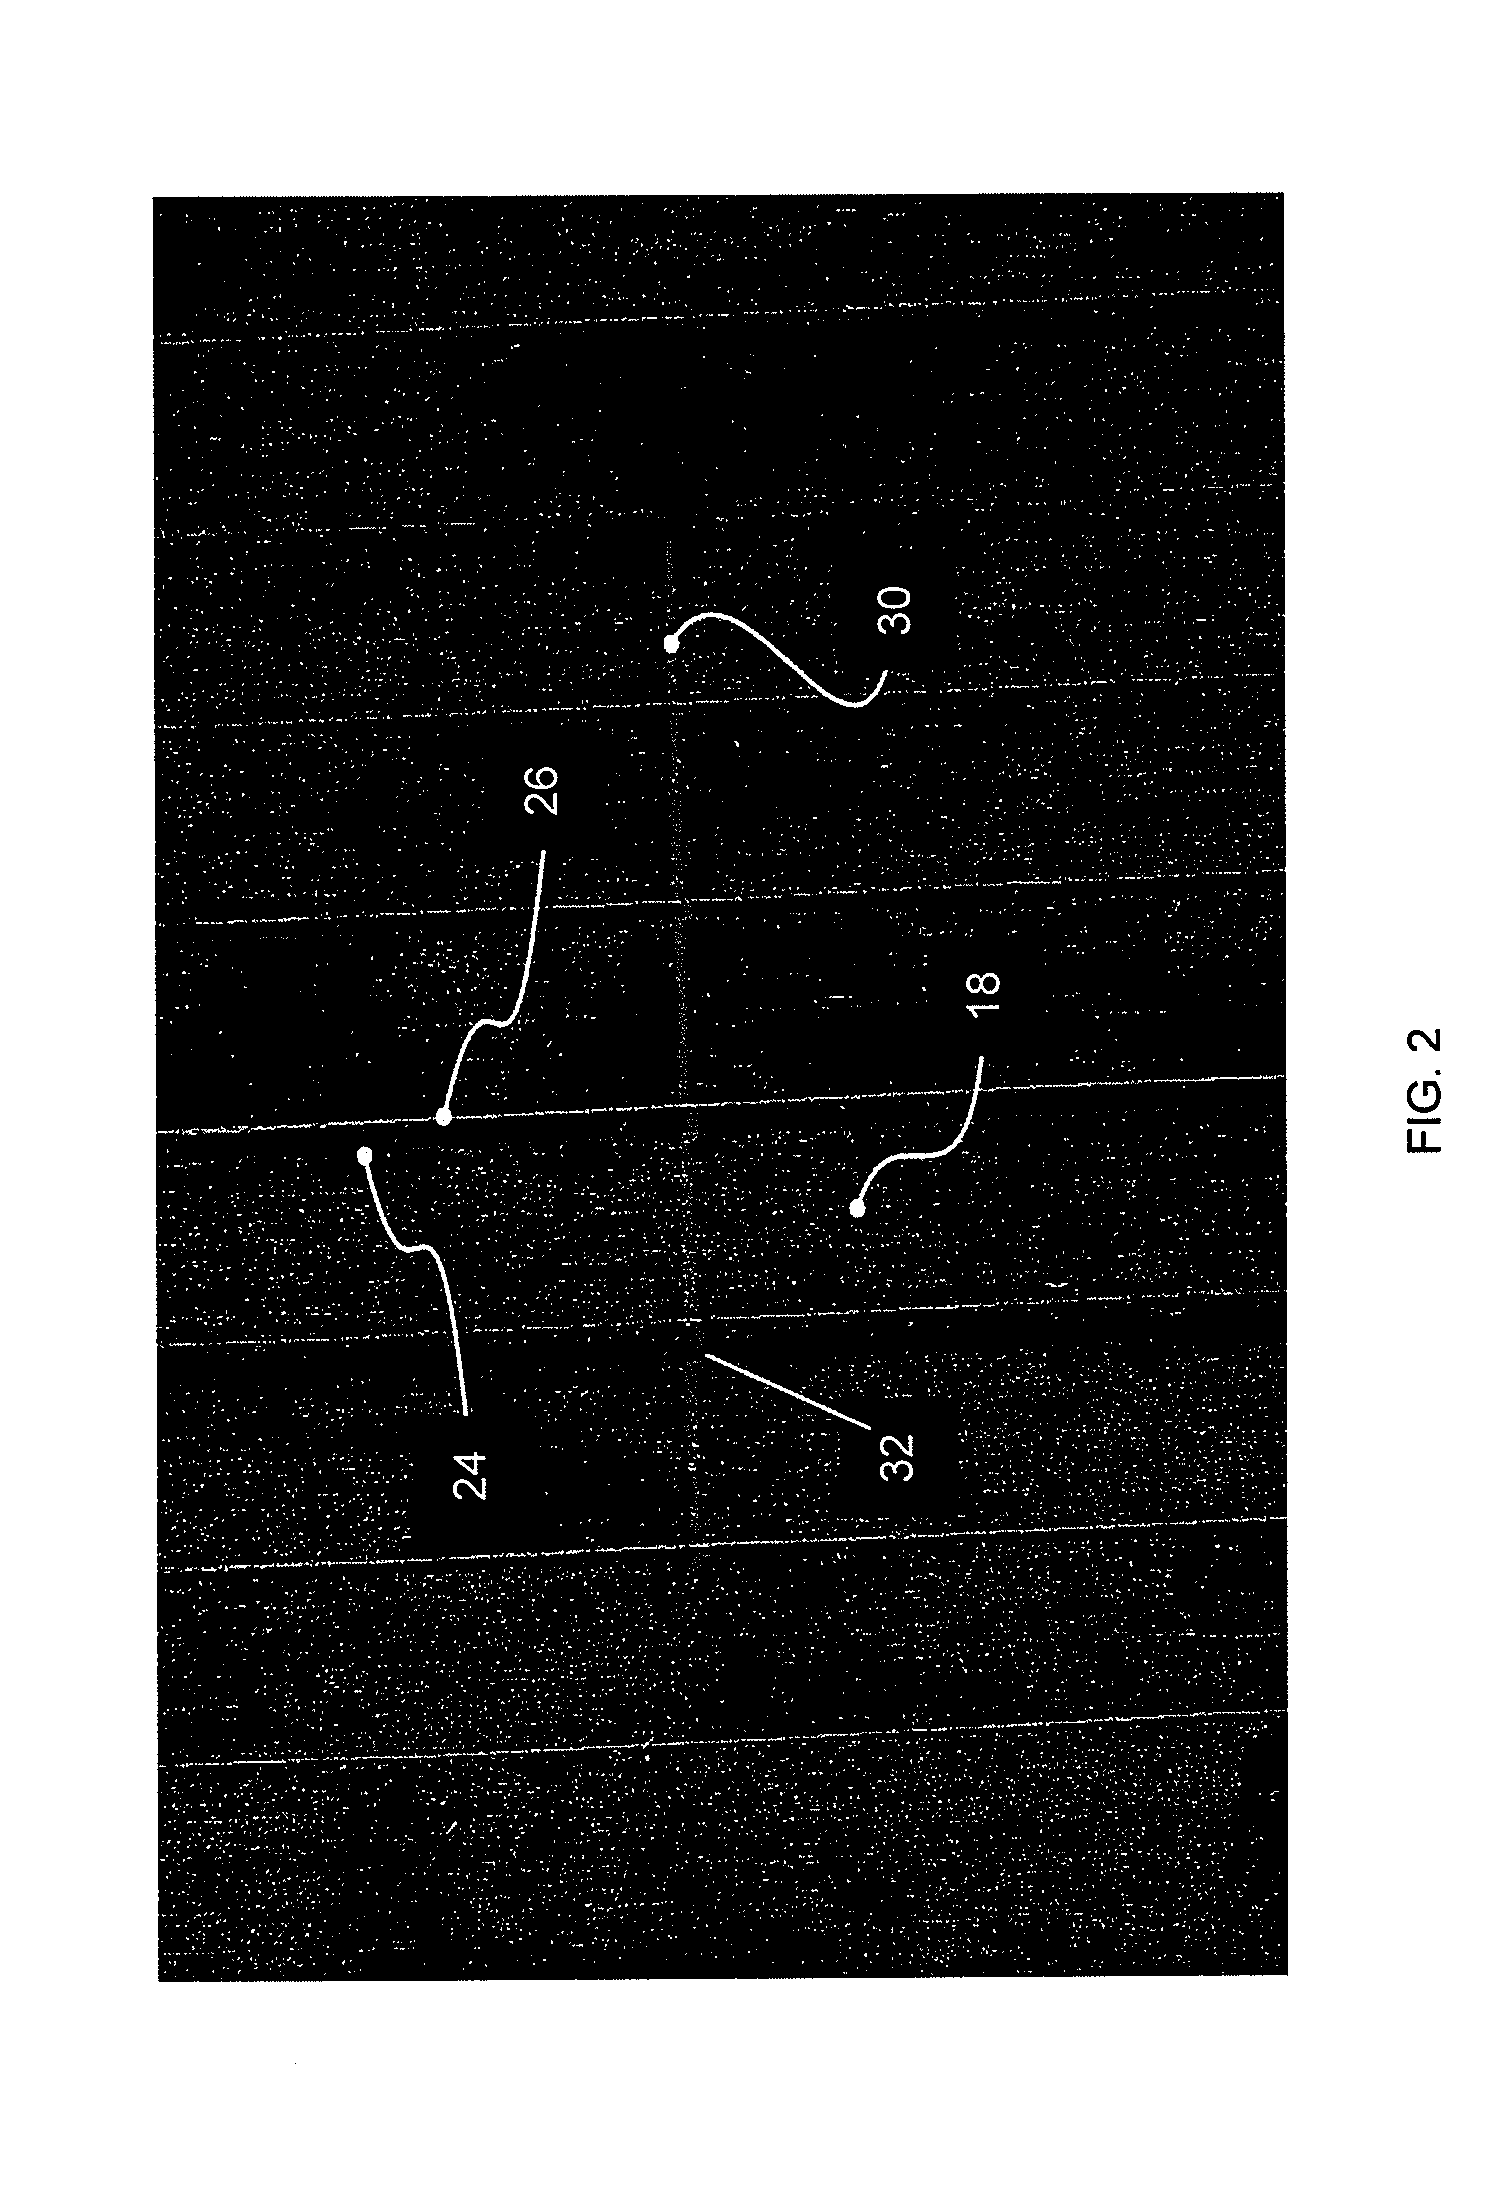 Method and System for Two-Dimensional and Three-Dimensional Inspection of a Workpiece